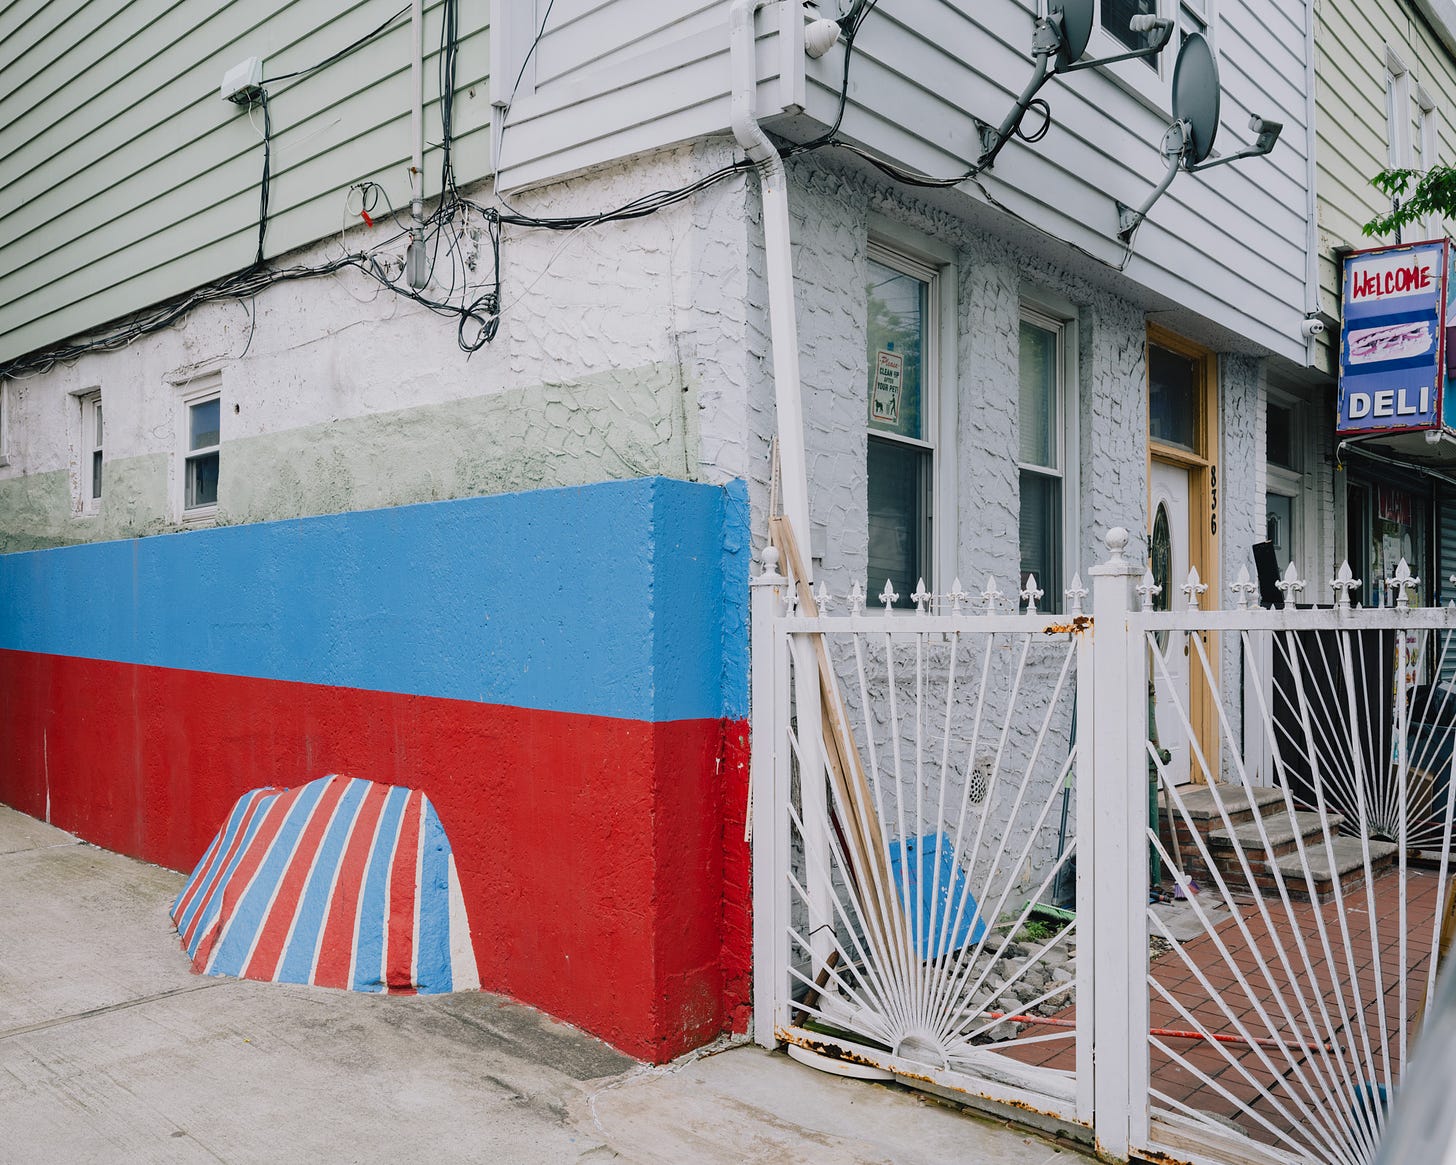 Corner-Of-Building-And-Rock-Painted-With-Blue-And-Red-Stripes